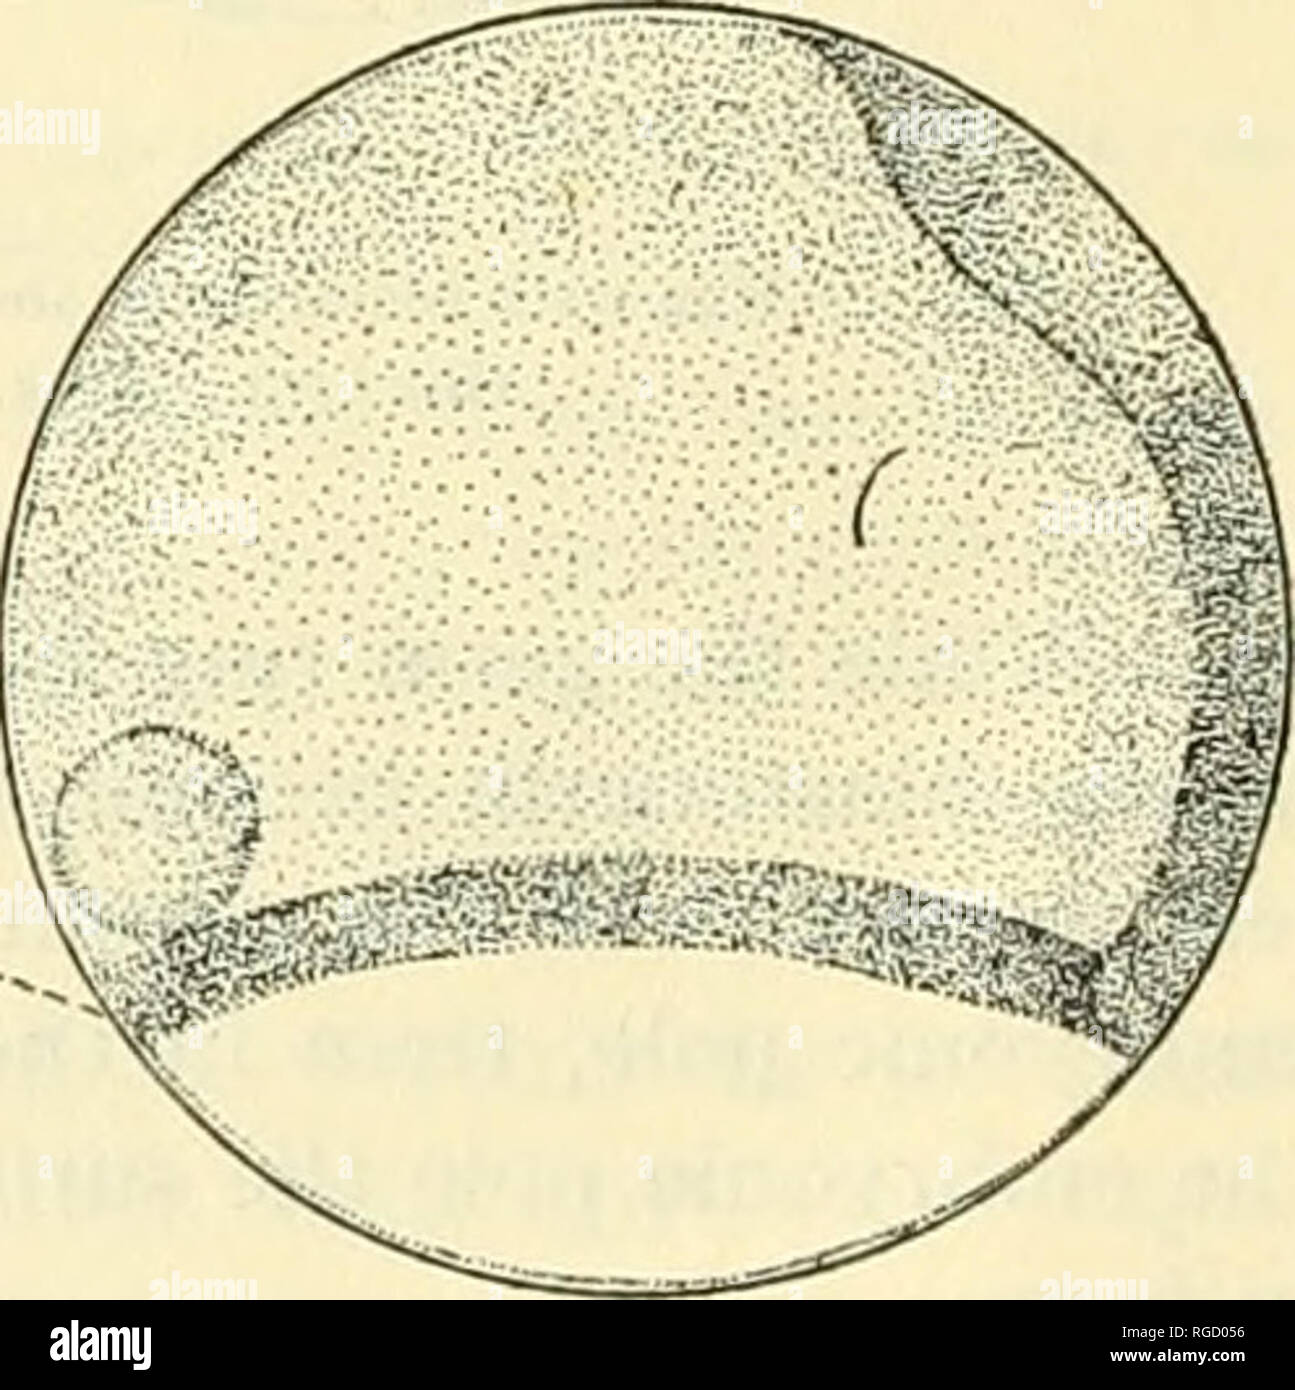 . Bulletin of the United States Fish Commission. Fisheries -- United States; Fish-culture -- United States. J&gt;P BAIRDIELLA CHRYSURA. Fig. 9.âEgg showing later stage in differentia- tion of embryonic shield; qt, gerro ring; es, embryonic shield. Fig. 10.âEgg showing embryonic shield (ci) with embrj'onic area (fa) outlined; tea, extra-embry- onic area; gr, germ ring; pp, posterior pole of blastoderm. outlined it is somewhat broader in the anterior or head region than in the posterior region. Observed in surface view (fig. 10) the embryonic area now has a more or less regular spatulate form. W Stock Photo